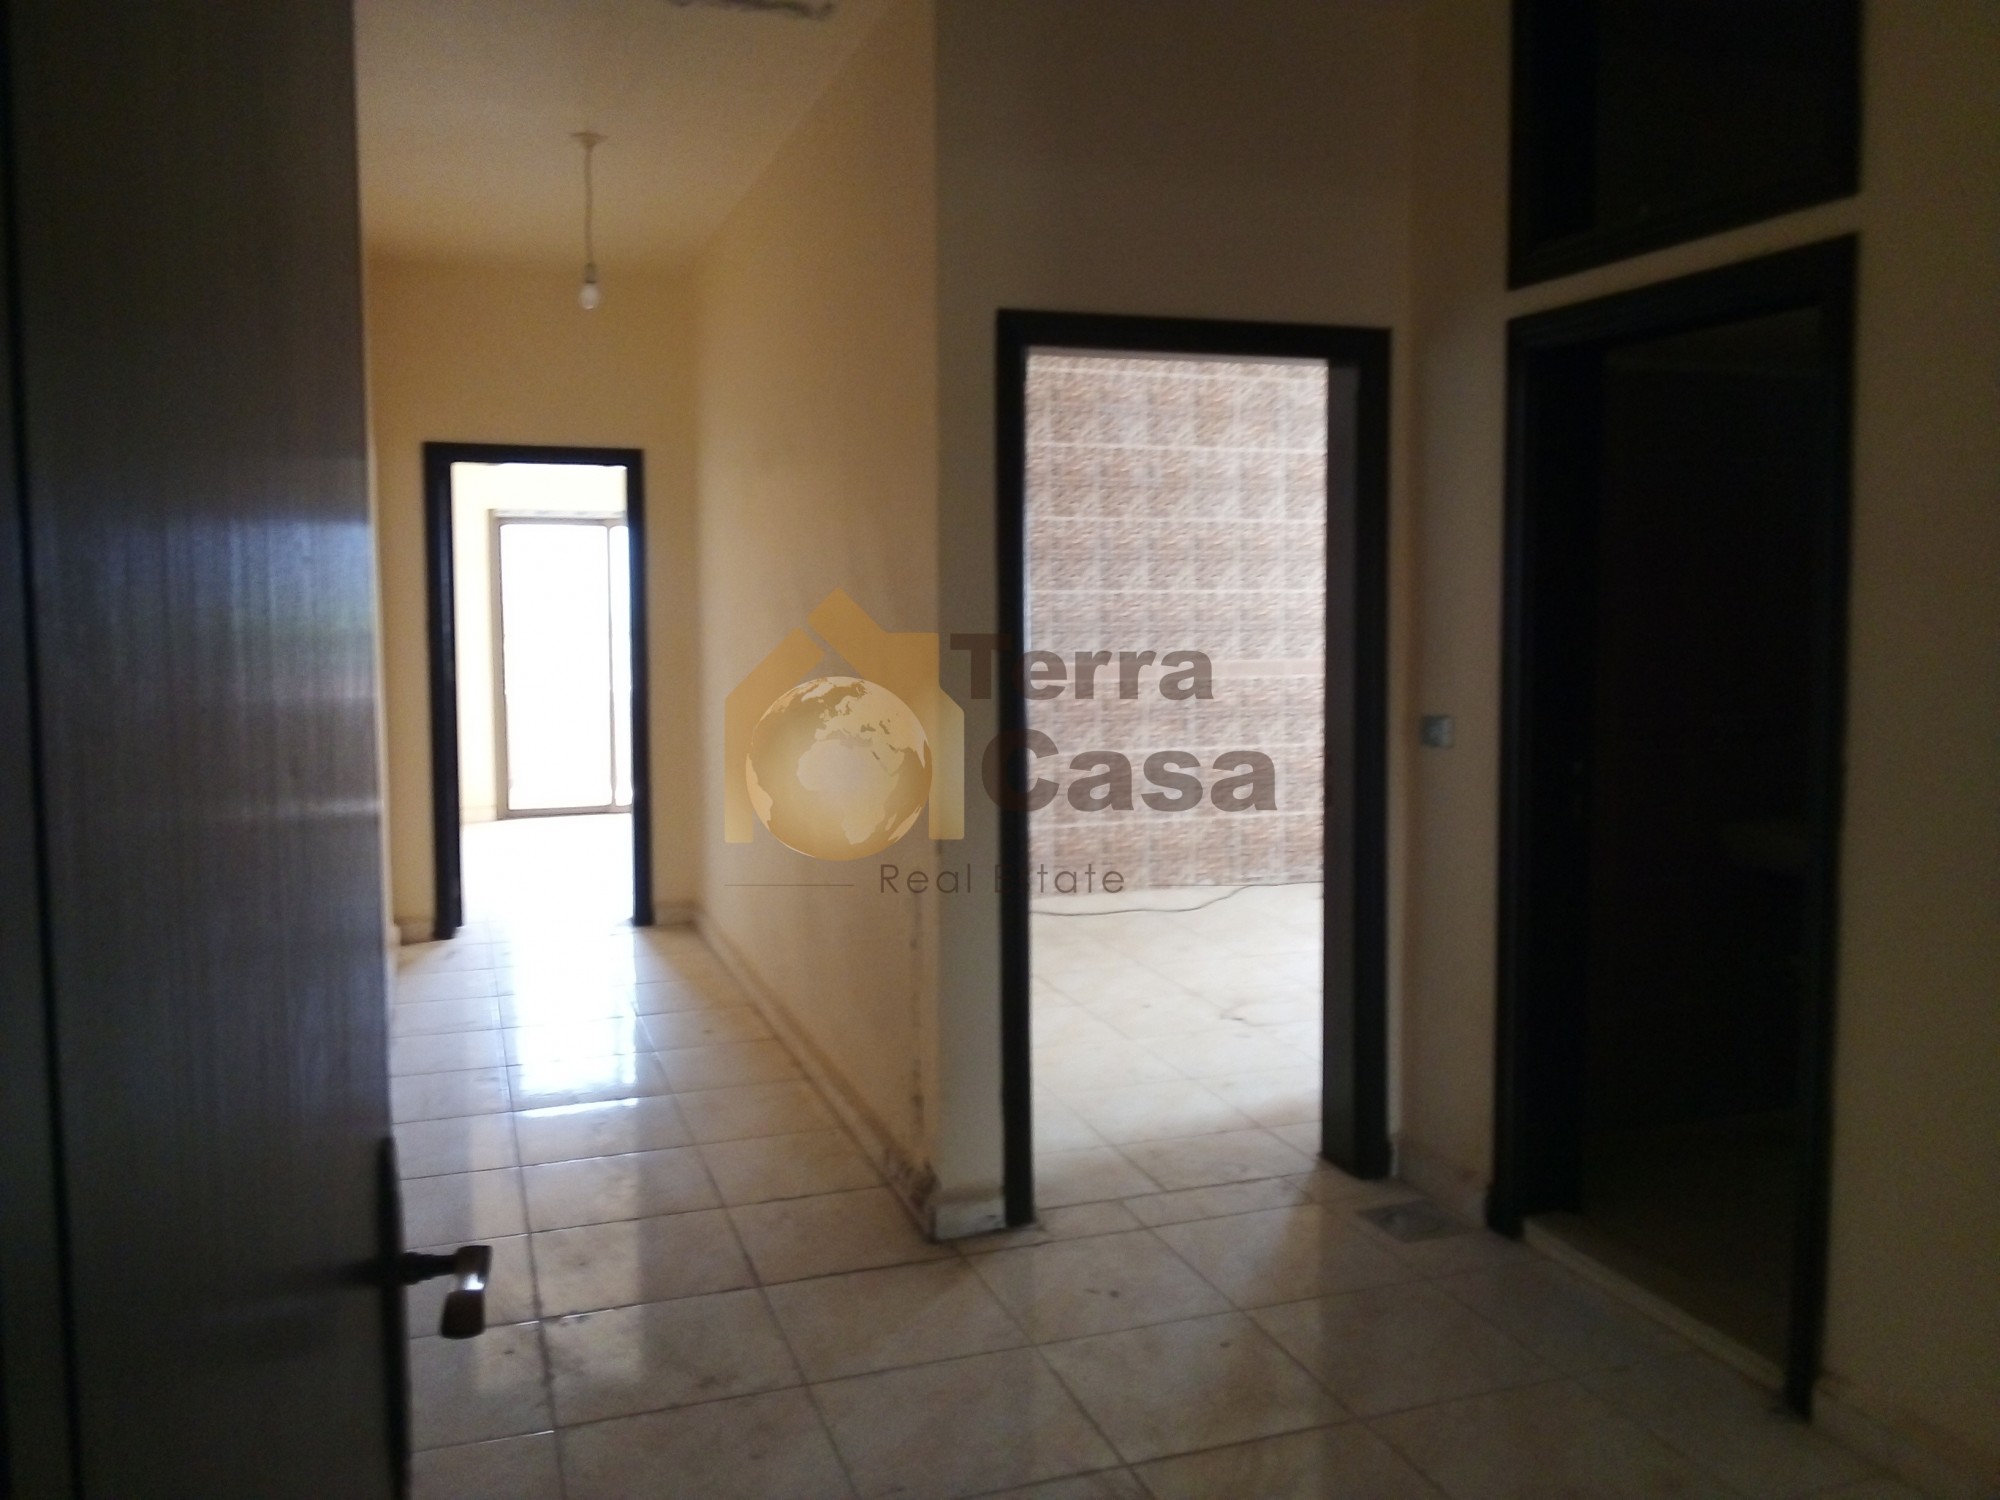 Apartment for rent in rayak main highway.